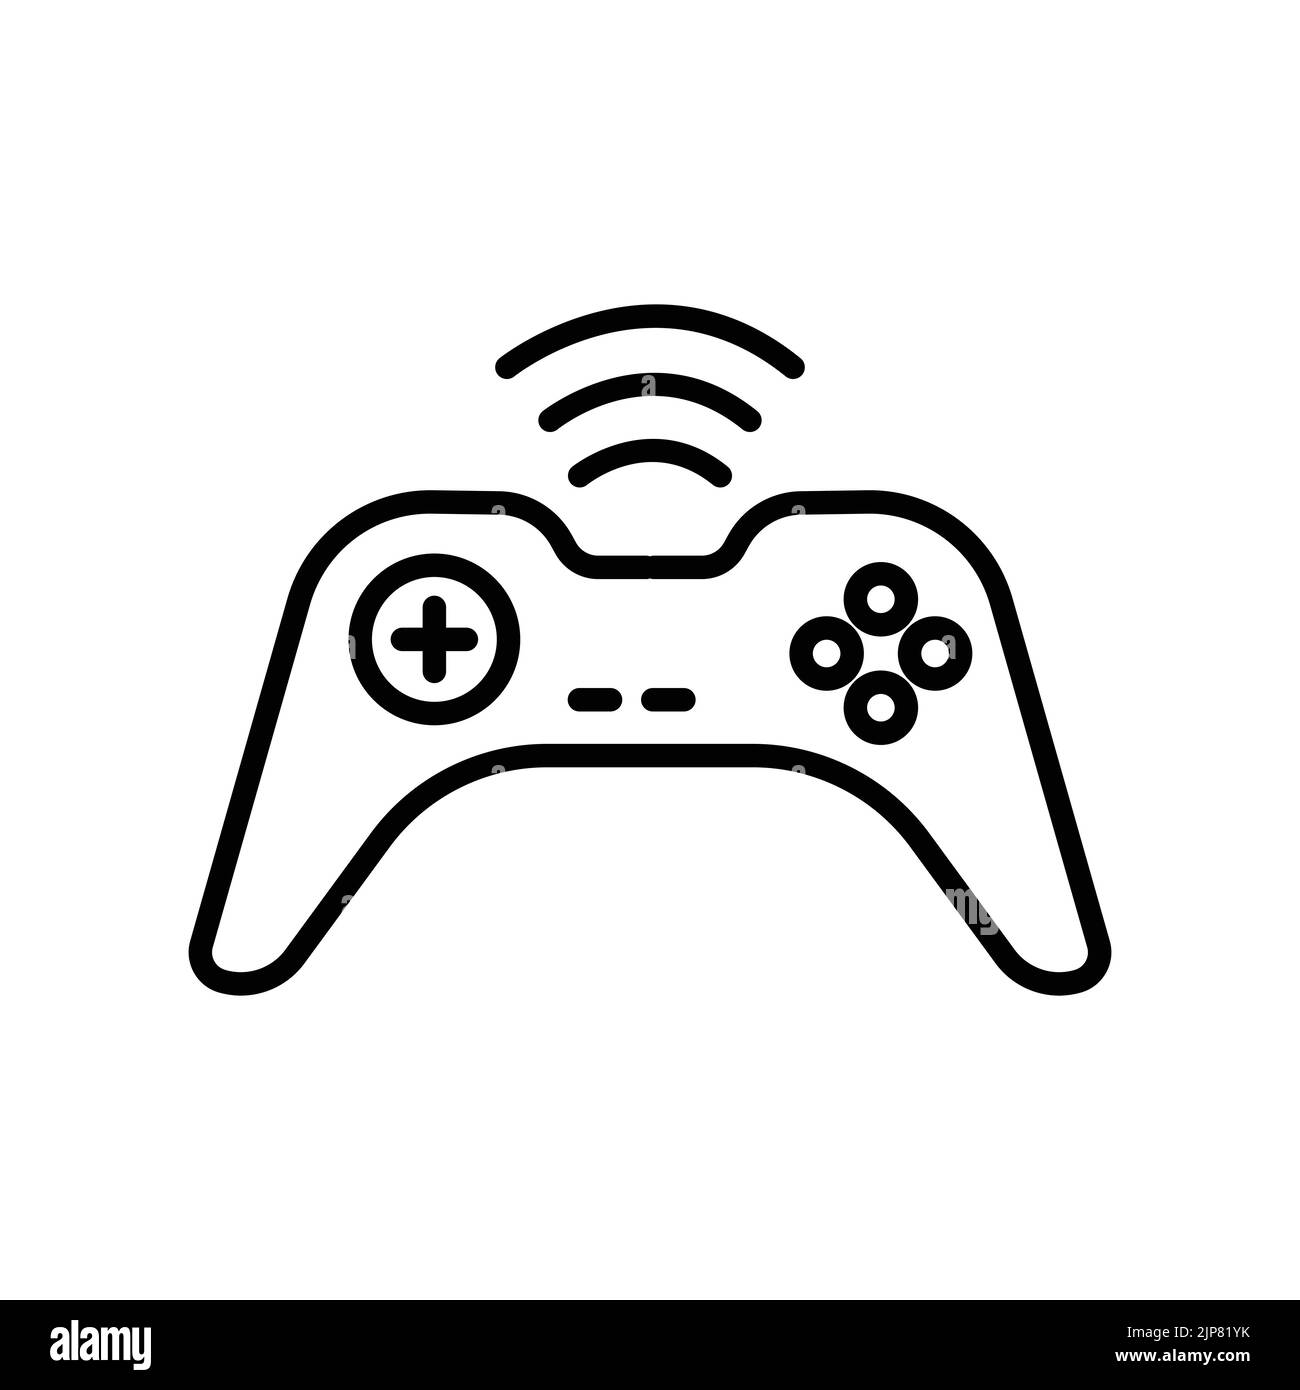 Joystick icon with signal. icon related to technology. smart device. line icon style. Simple design editable Stock Vector